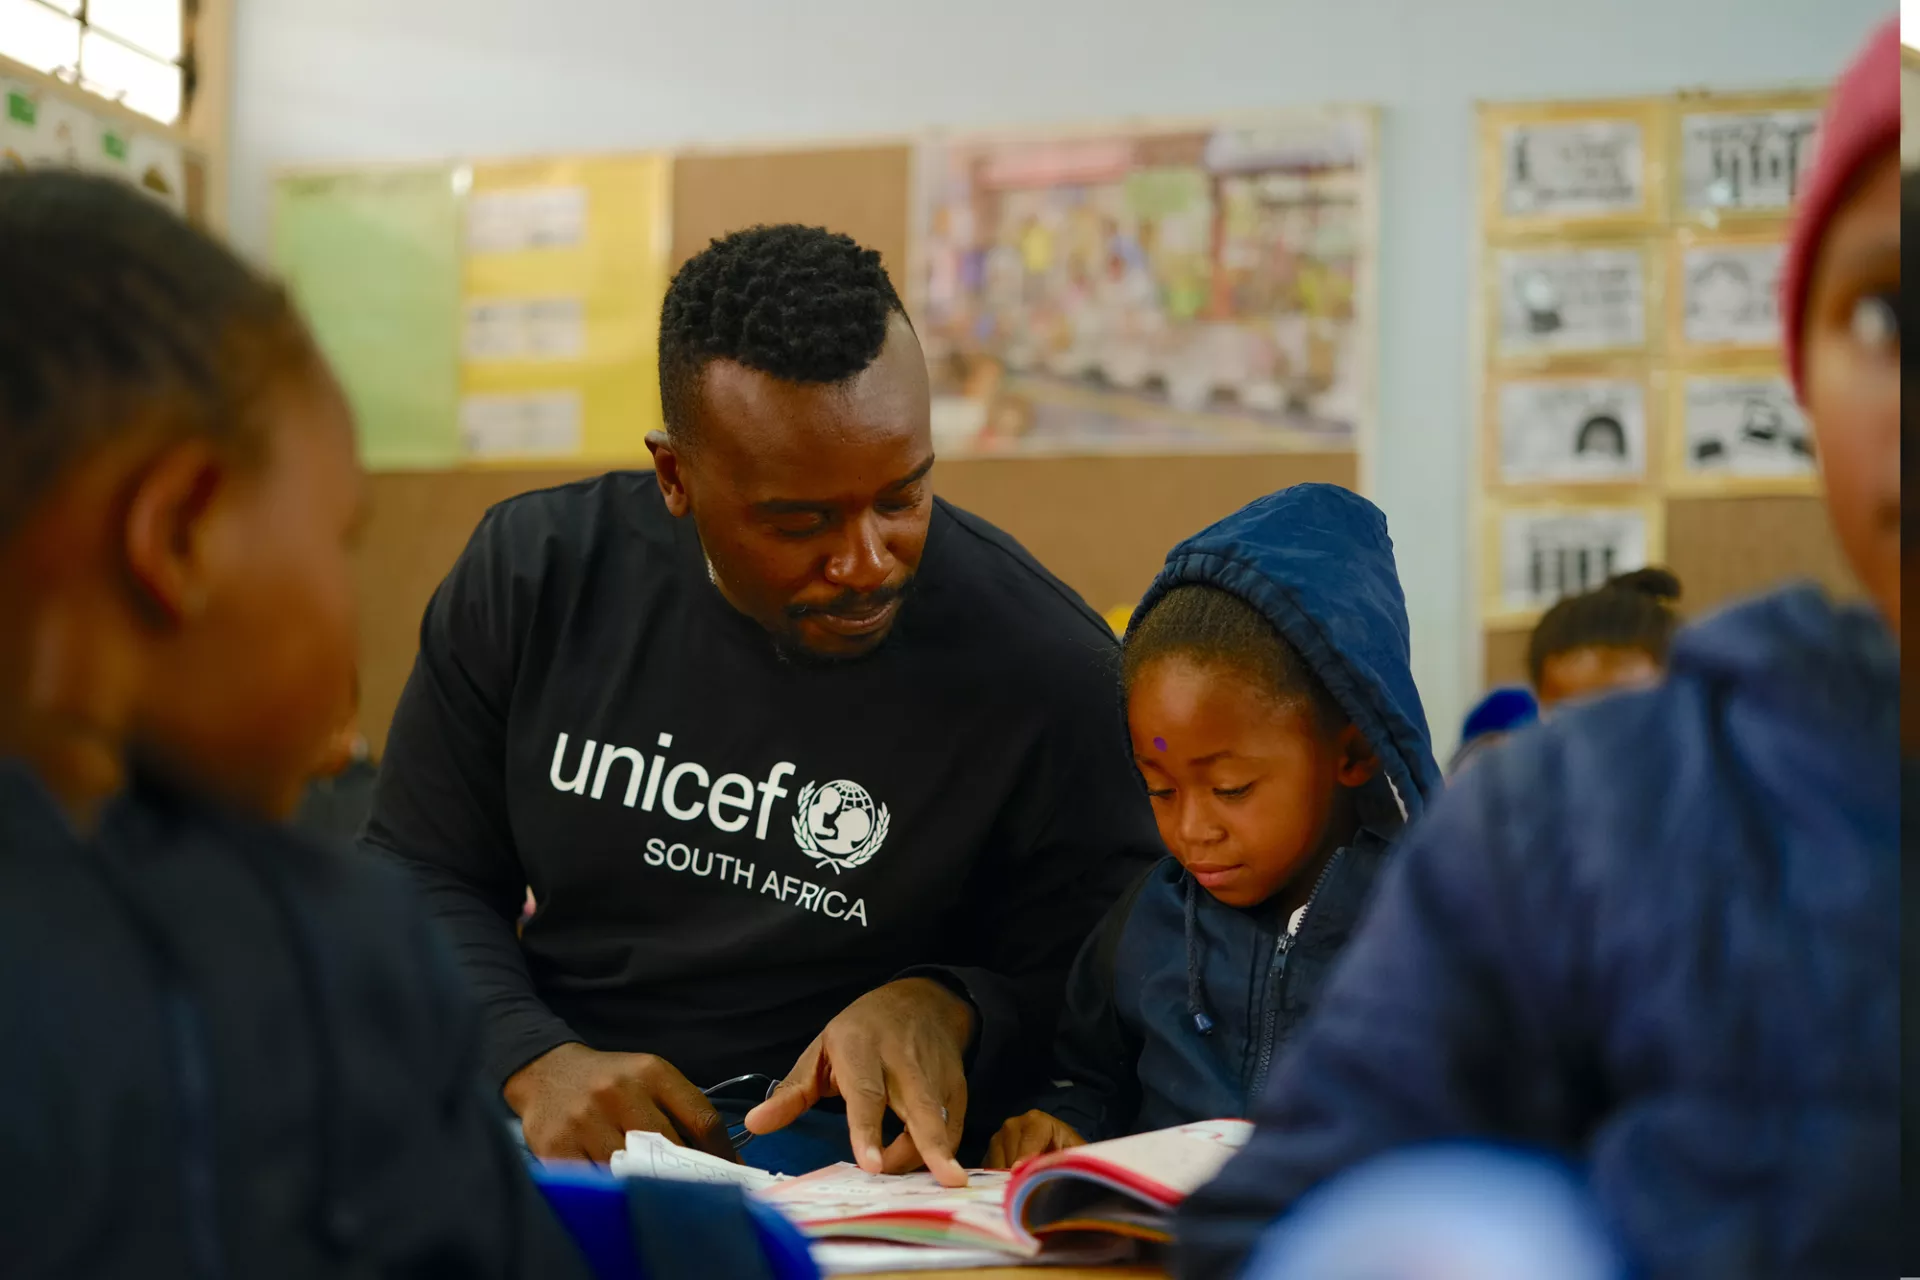 UNICEF staff member helping a child read during a school visit.